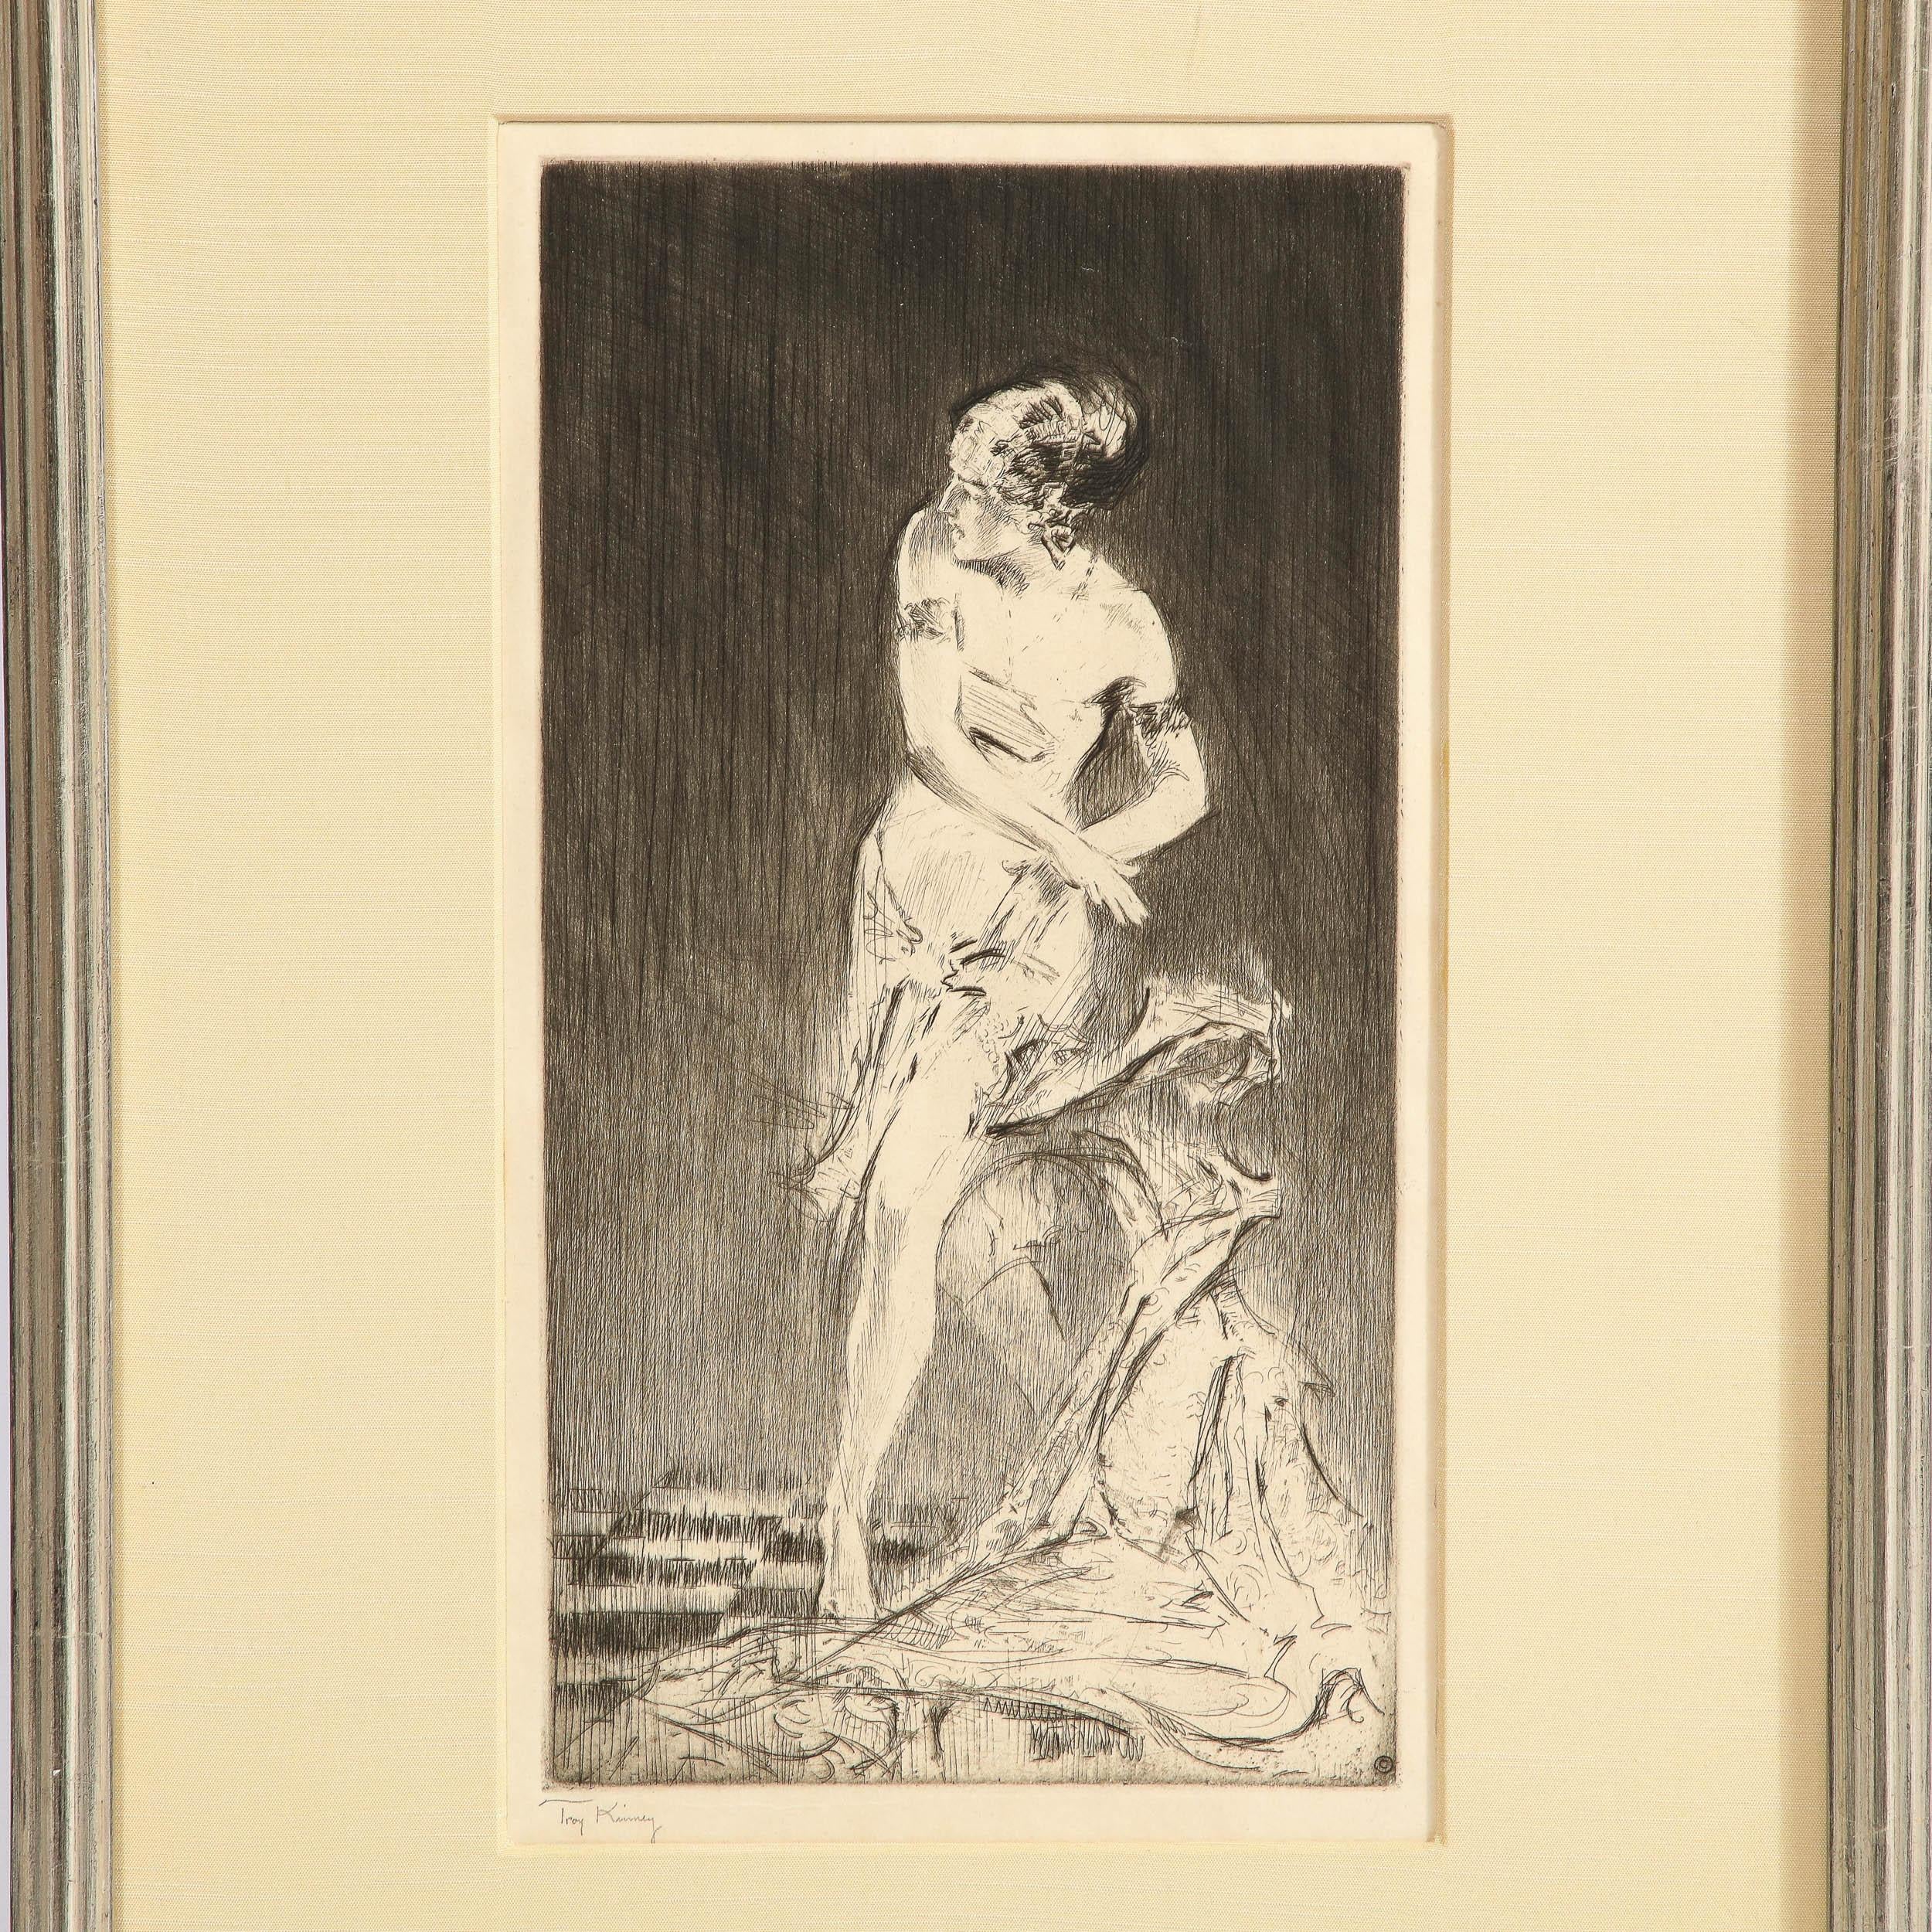 This beautiful and sophisticated etching and drypoint was realized by the esteemed American artist Troy Kinney in the United States circa 1920. The work features a lone female figure (presumable Vera) with an ombre gradient background standing on a